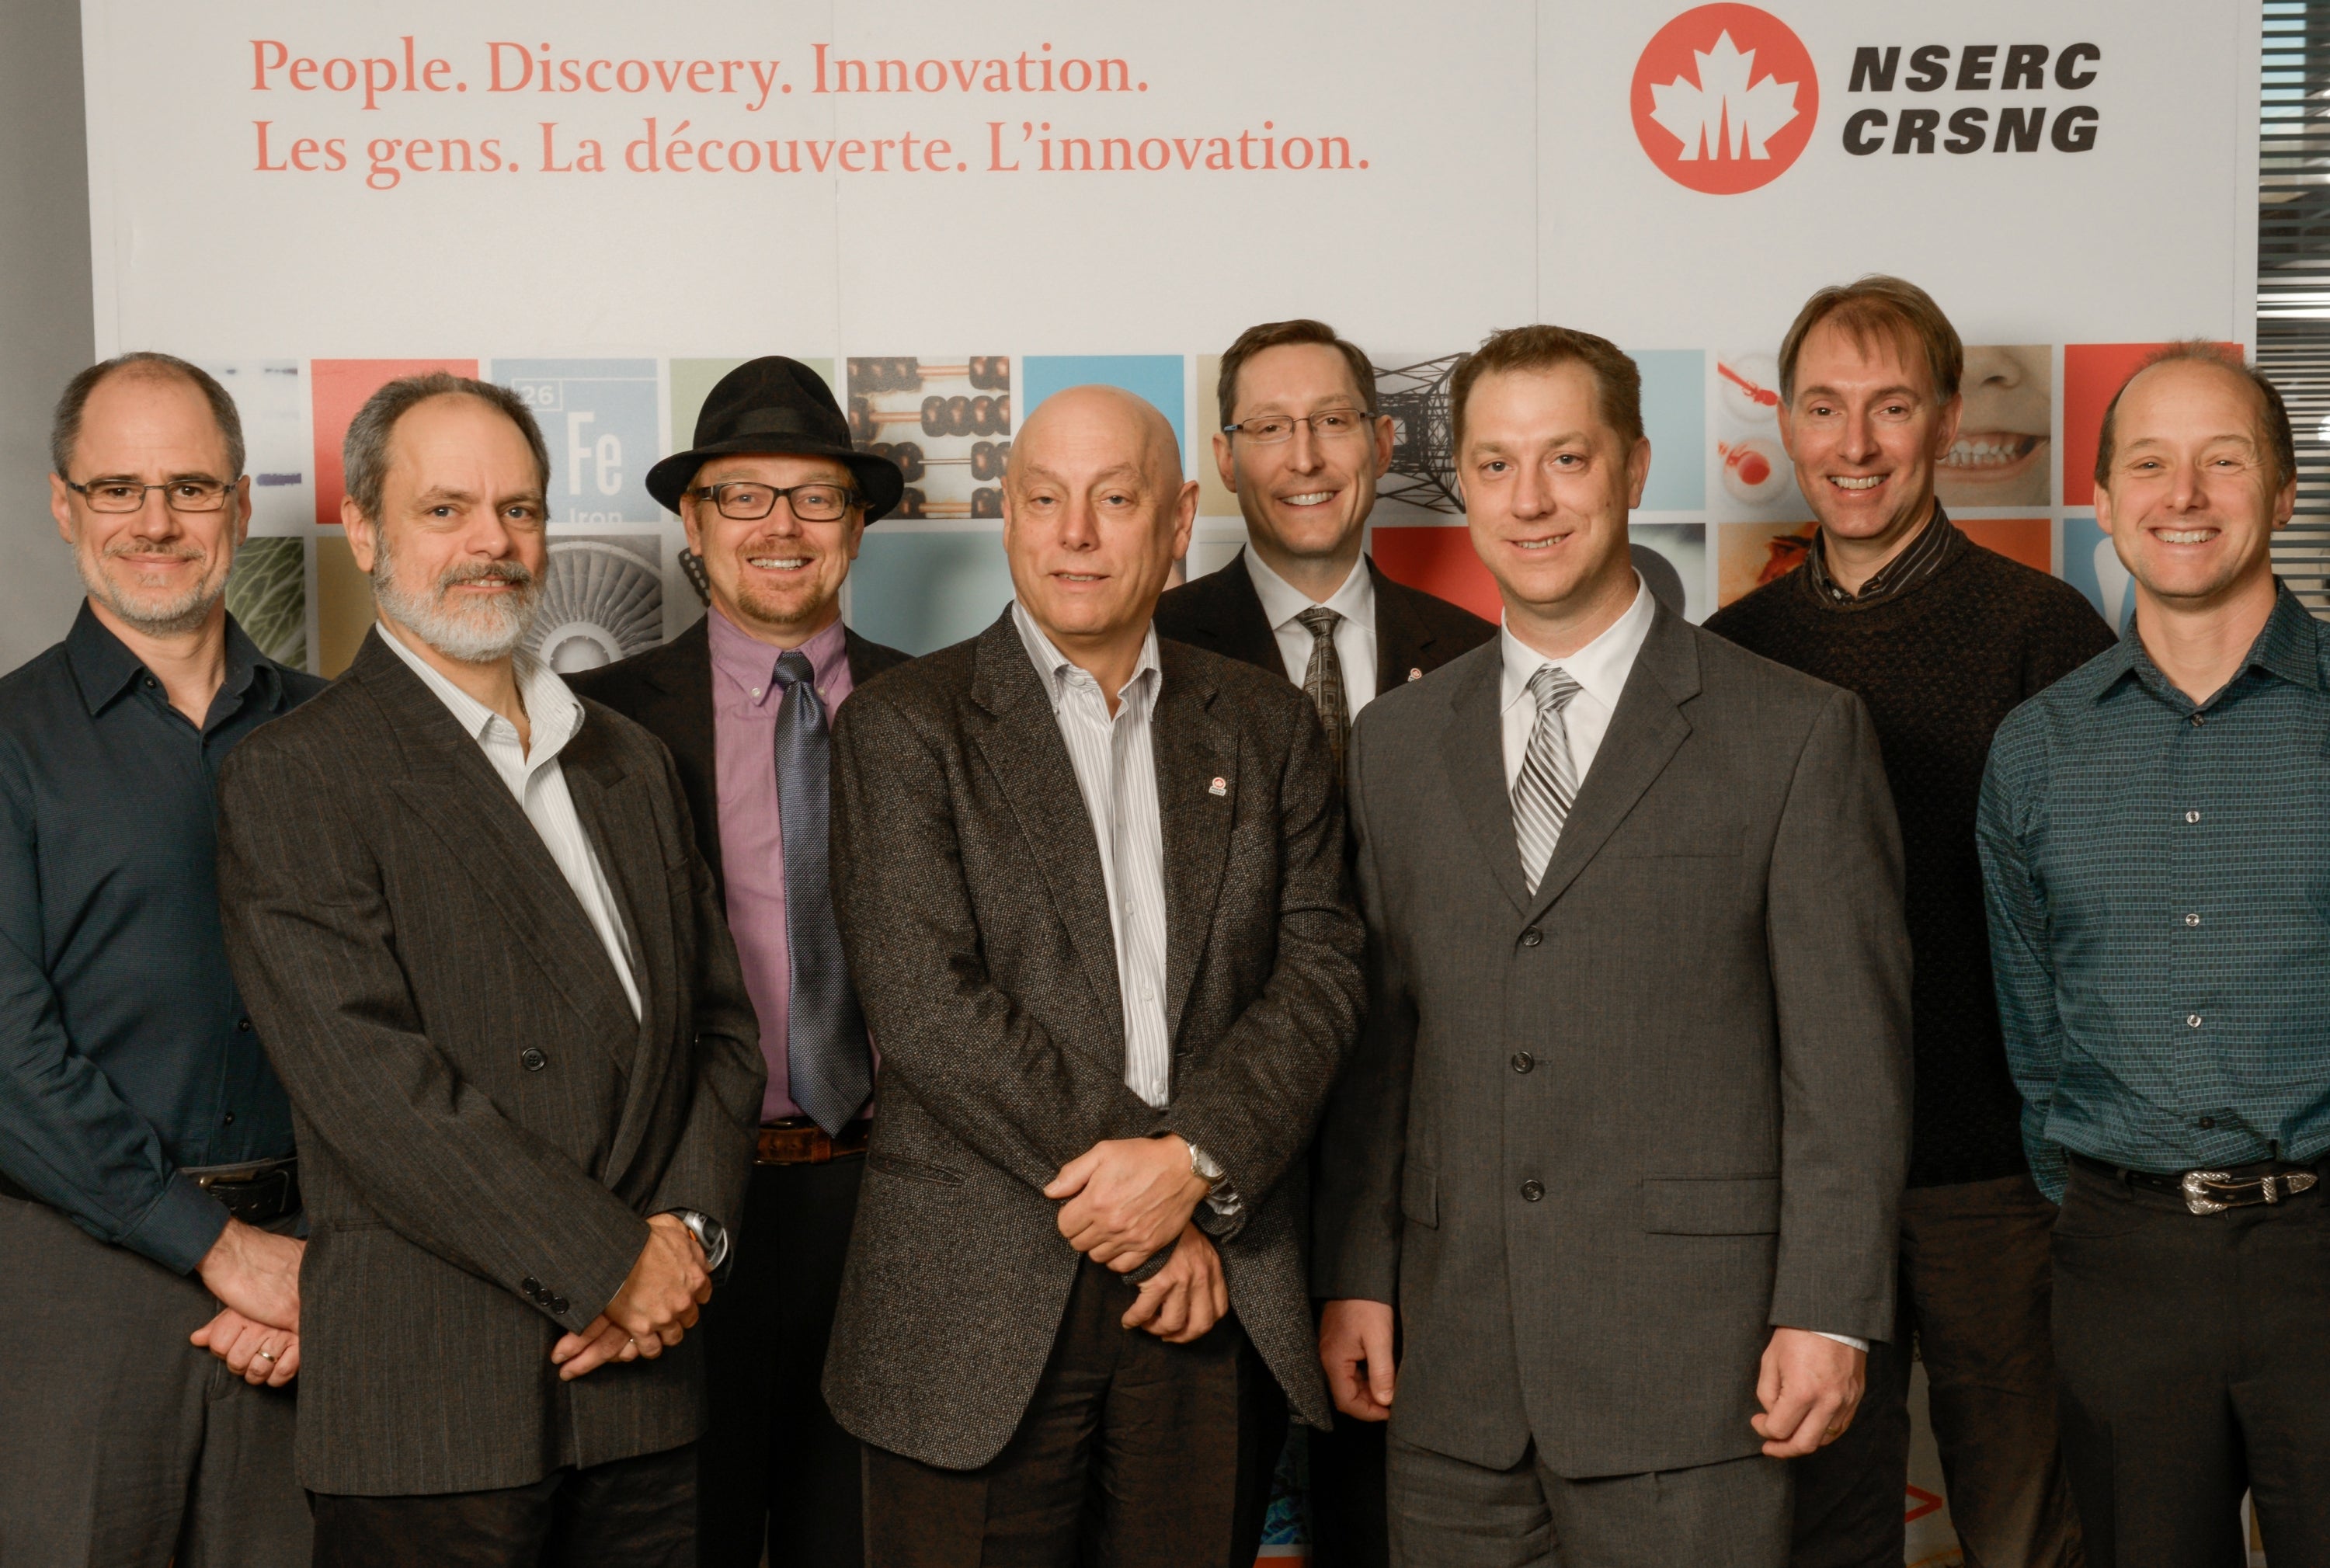 Dr Dixon, Dr.  John Heath - the owner of Yellow Island Aquaculture and researchers from four other universities at the NSERc awards ceremony